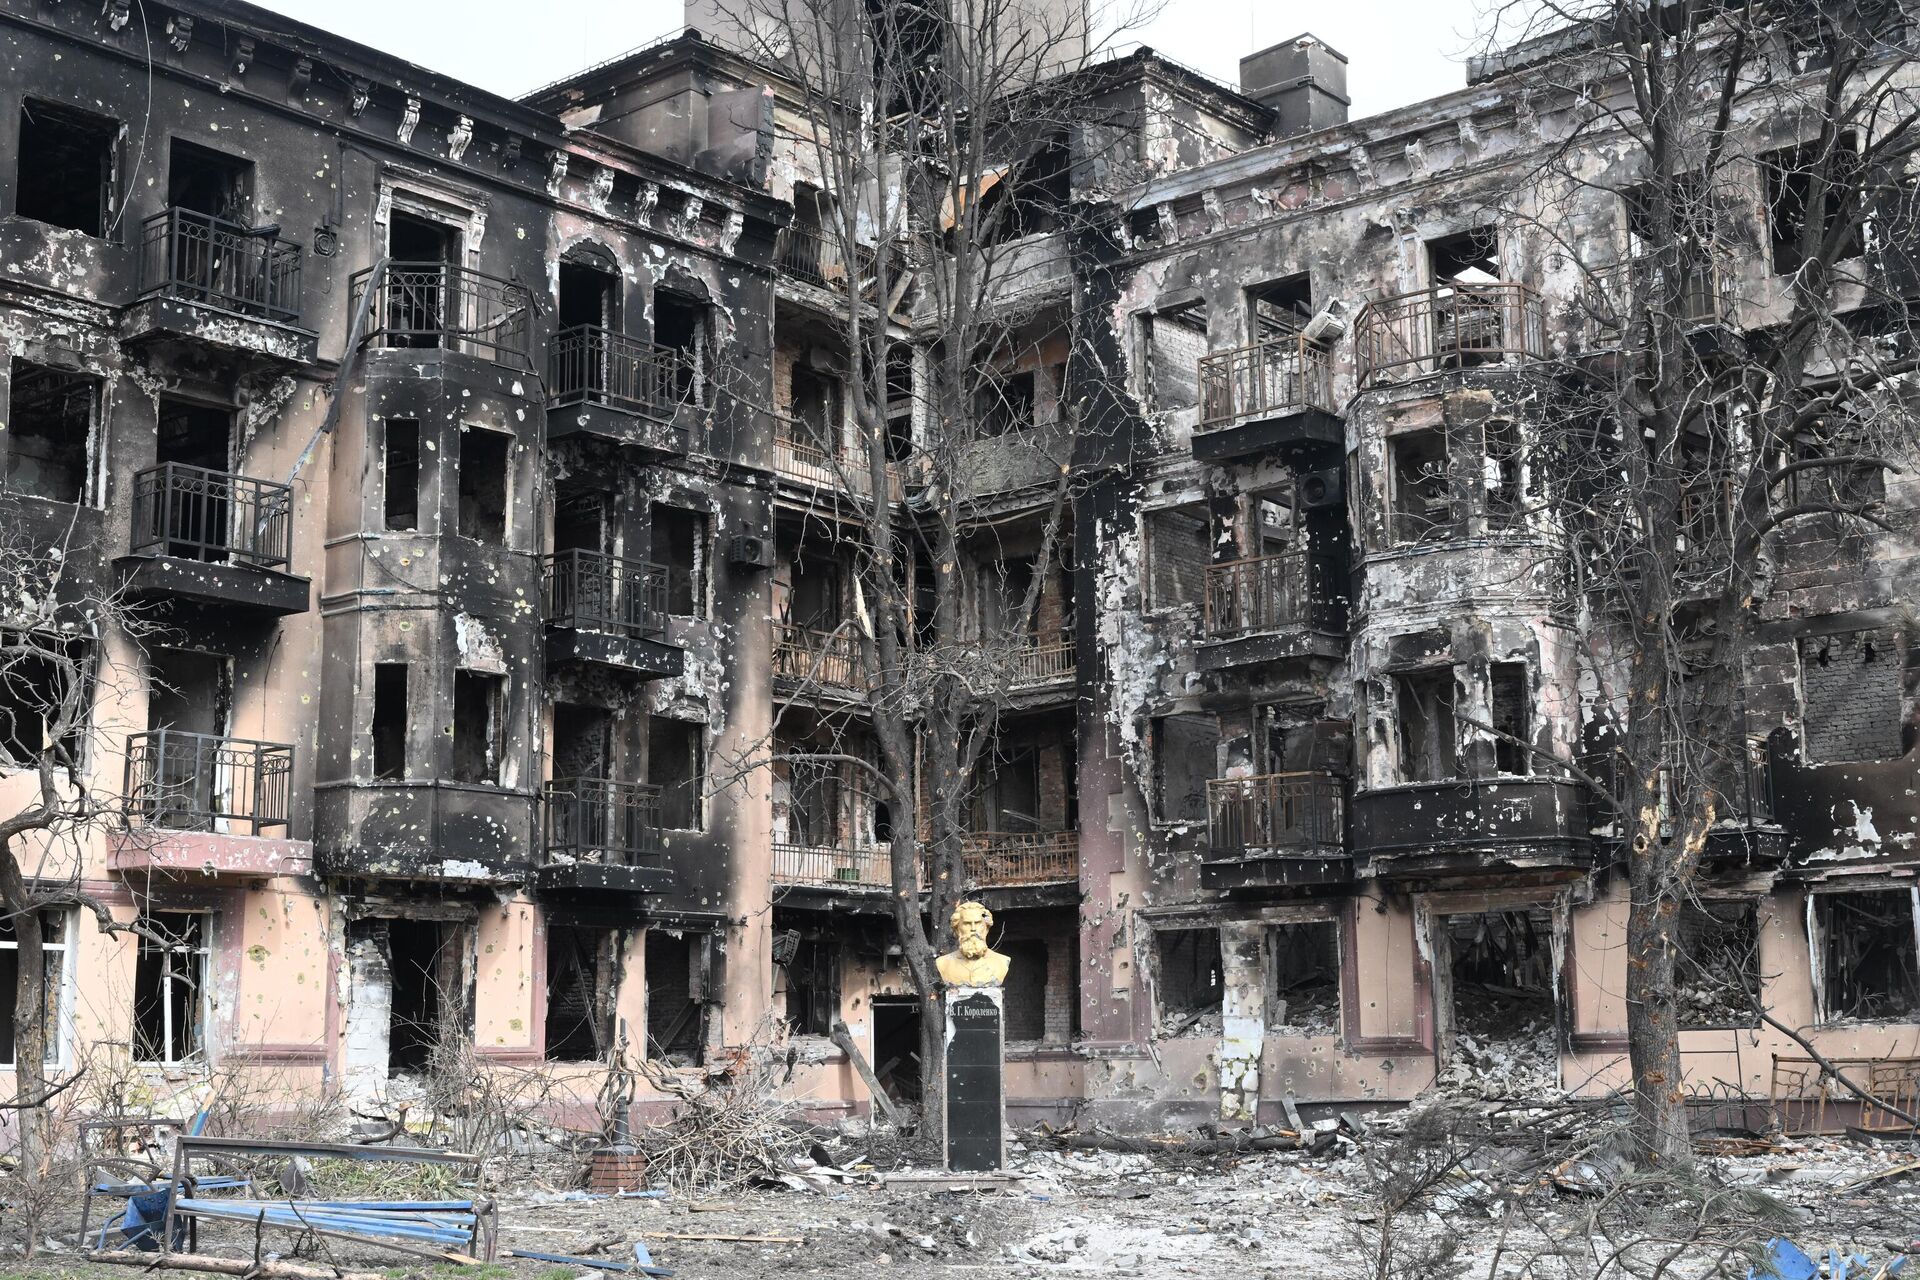 A monument to the writer Vladimir Korolenko is seen near a library destroyed as a result of shelling, in Mariupol, Donetsk People's Republic. - Sputnik International, 1920, 12.04.2022